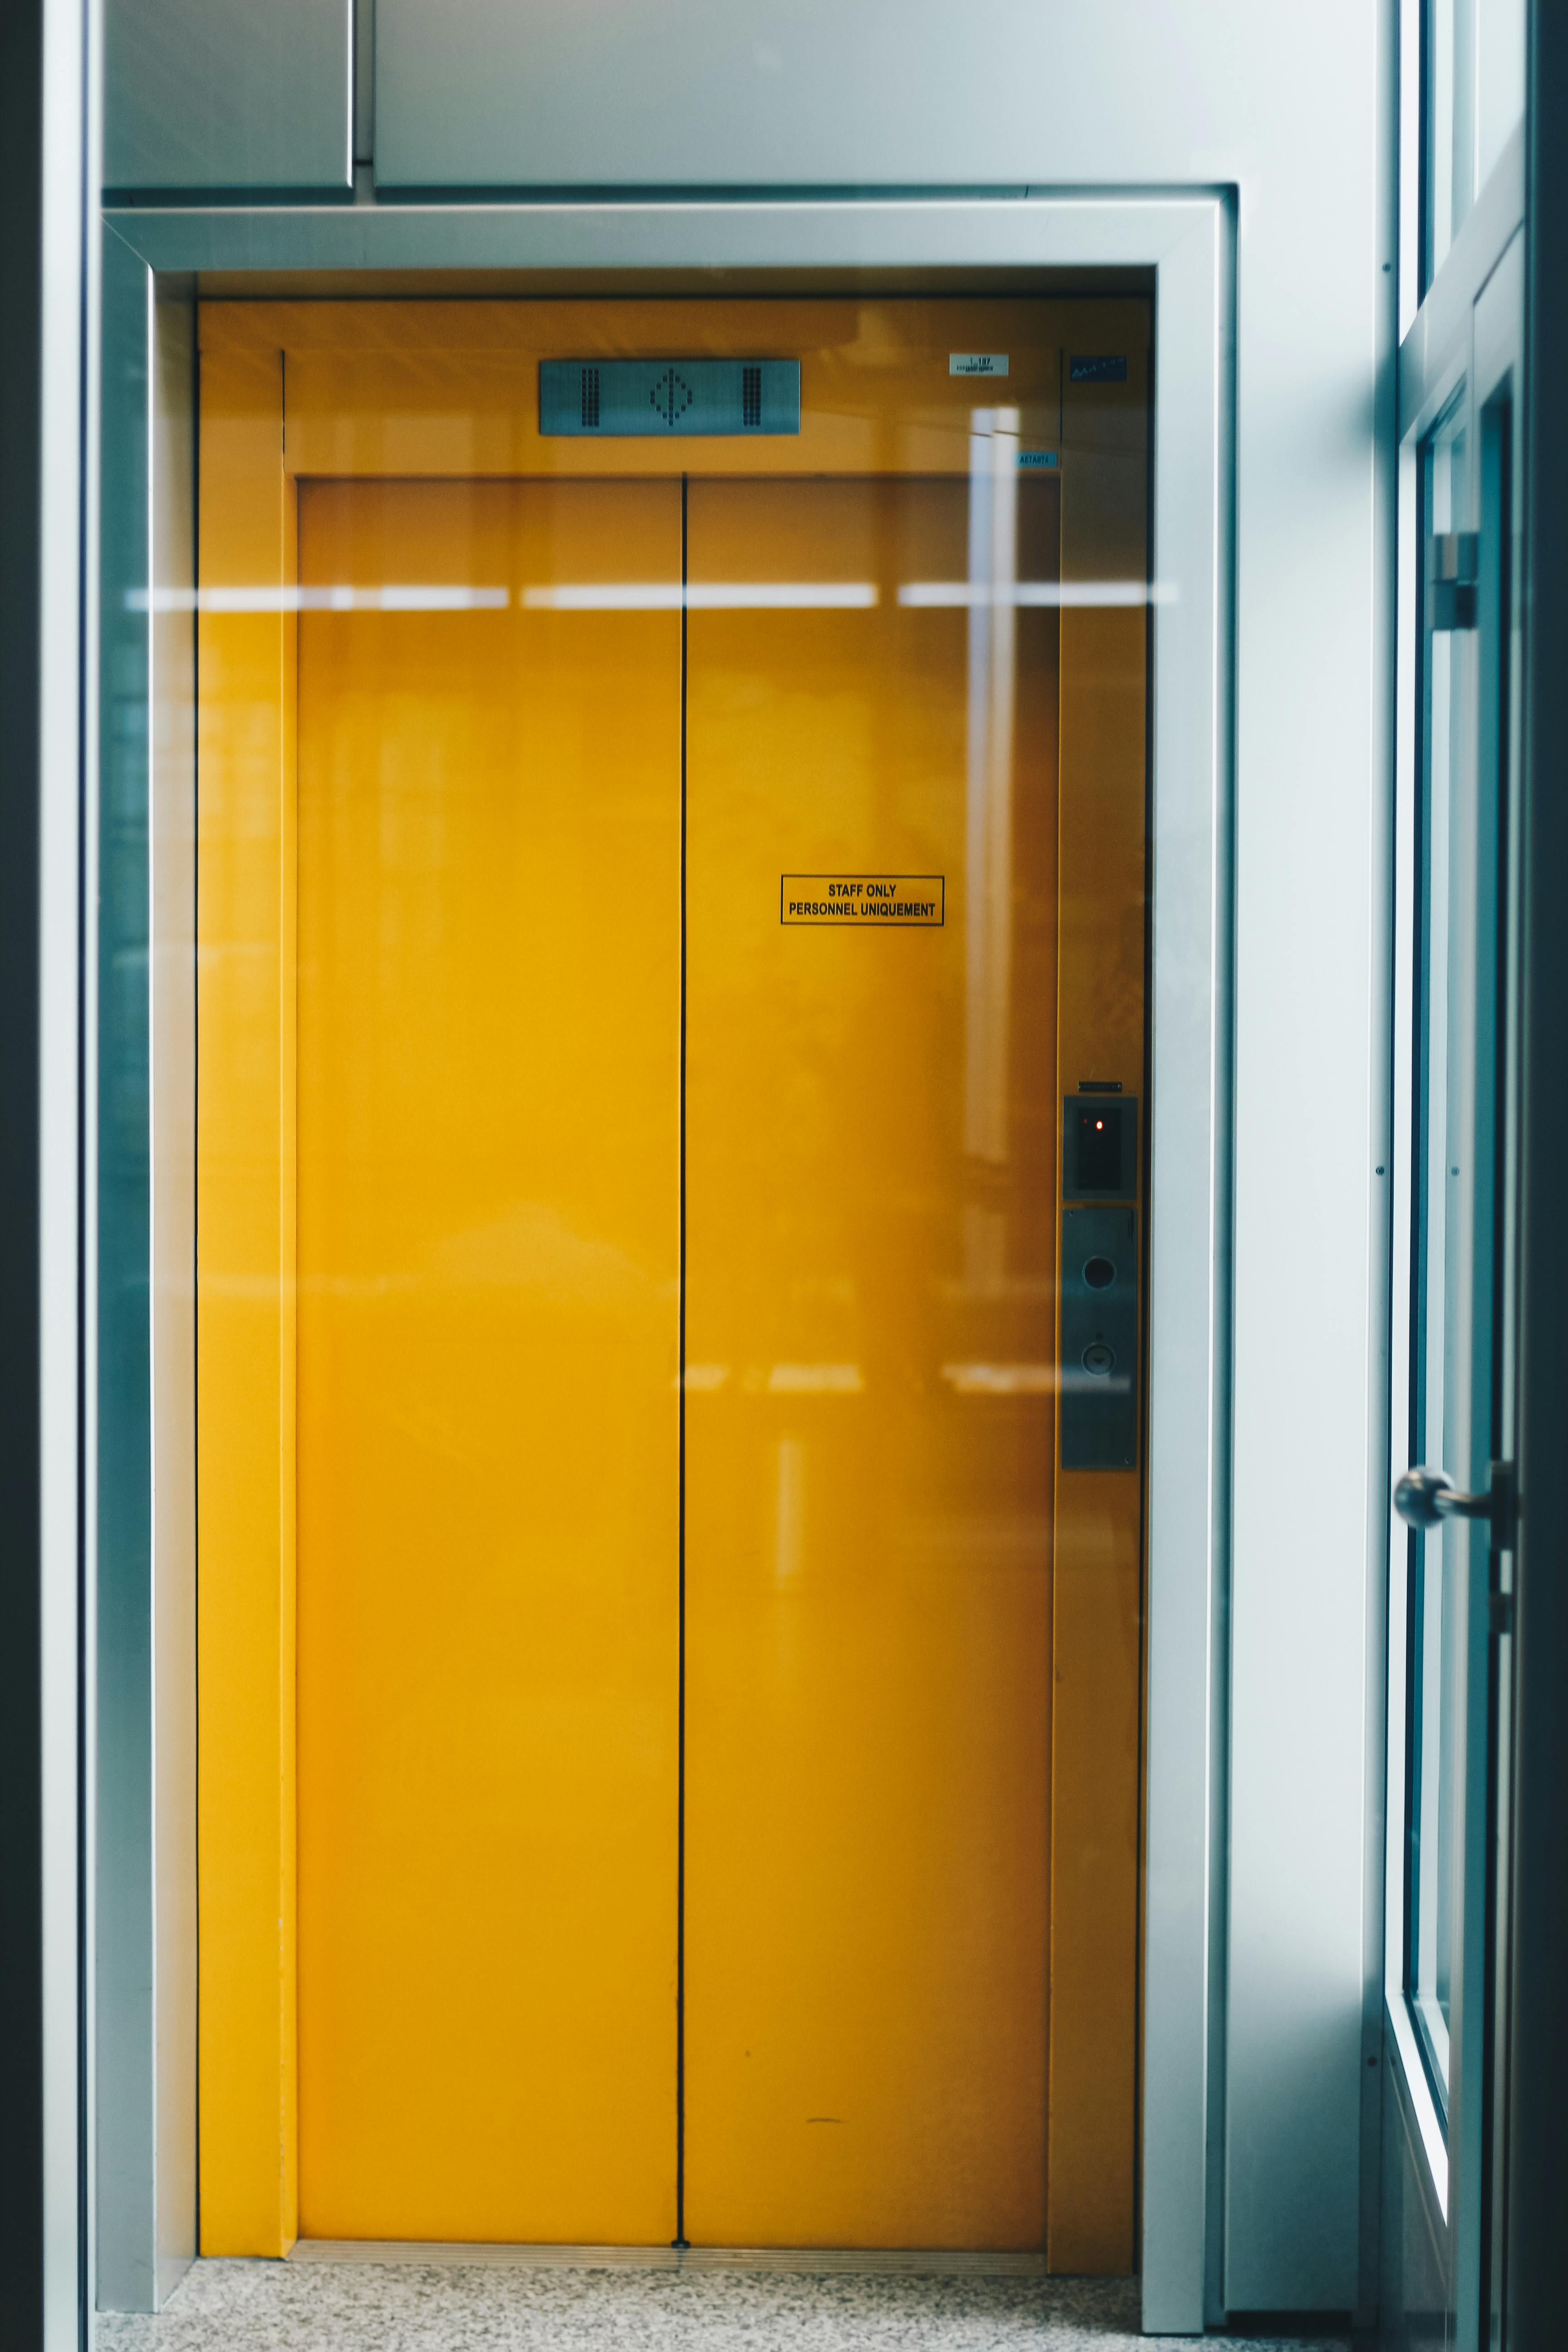 A 'staff only' elevator | Photo: Pexels